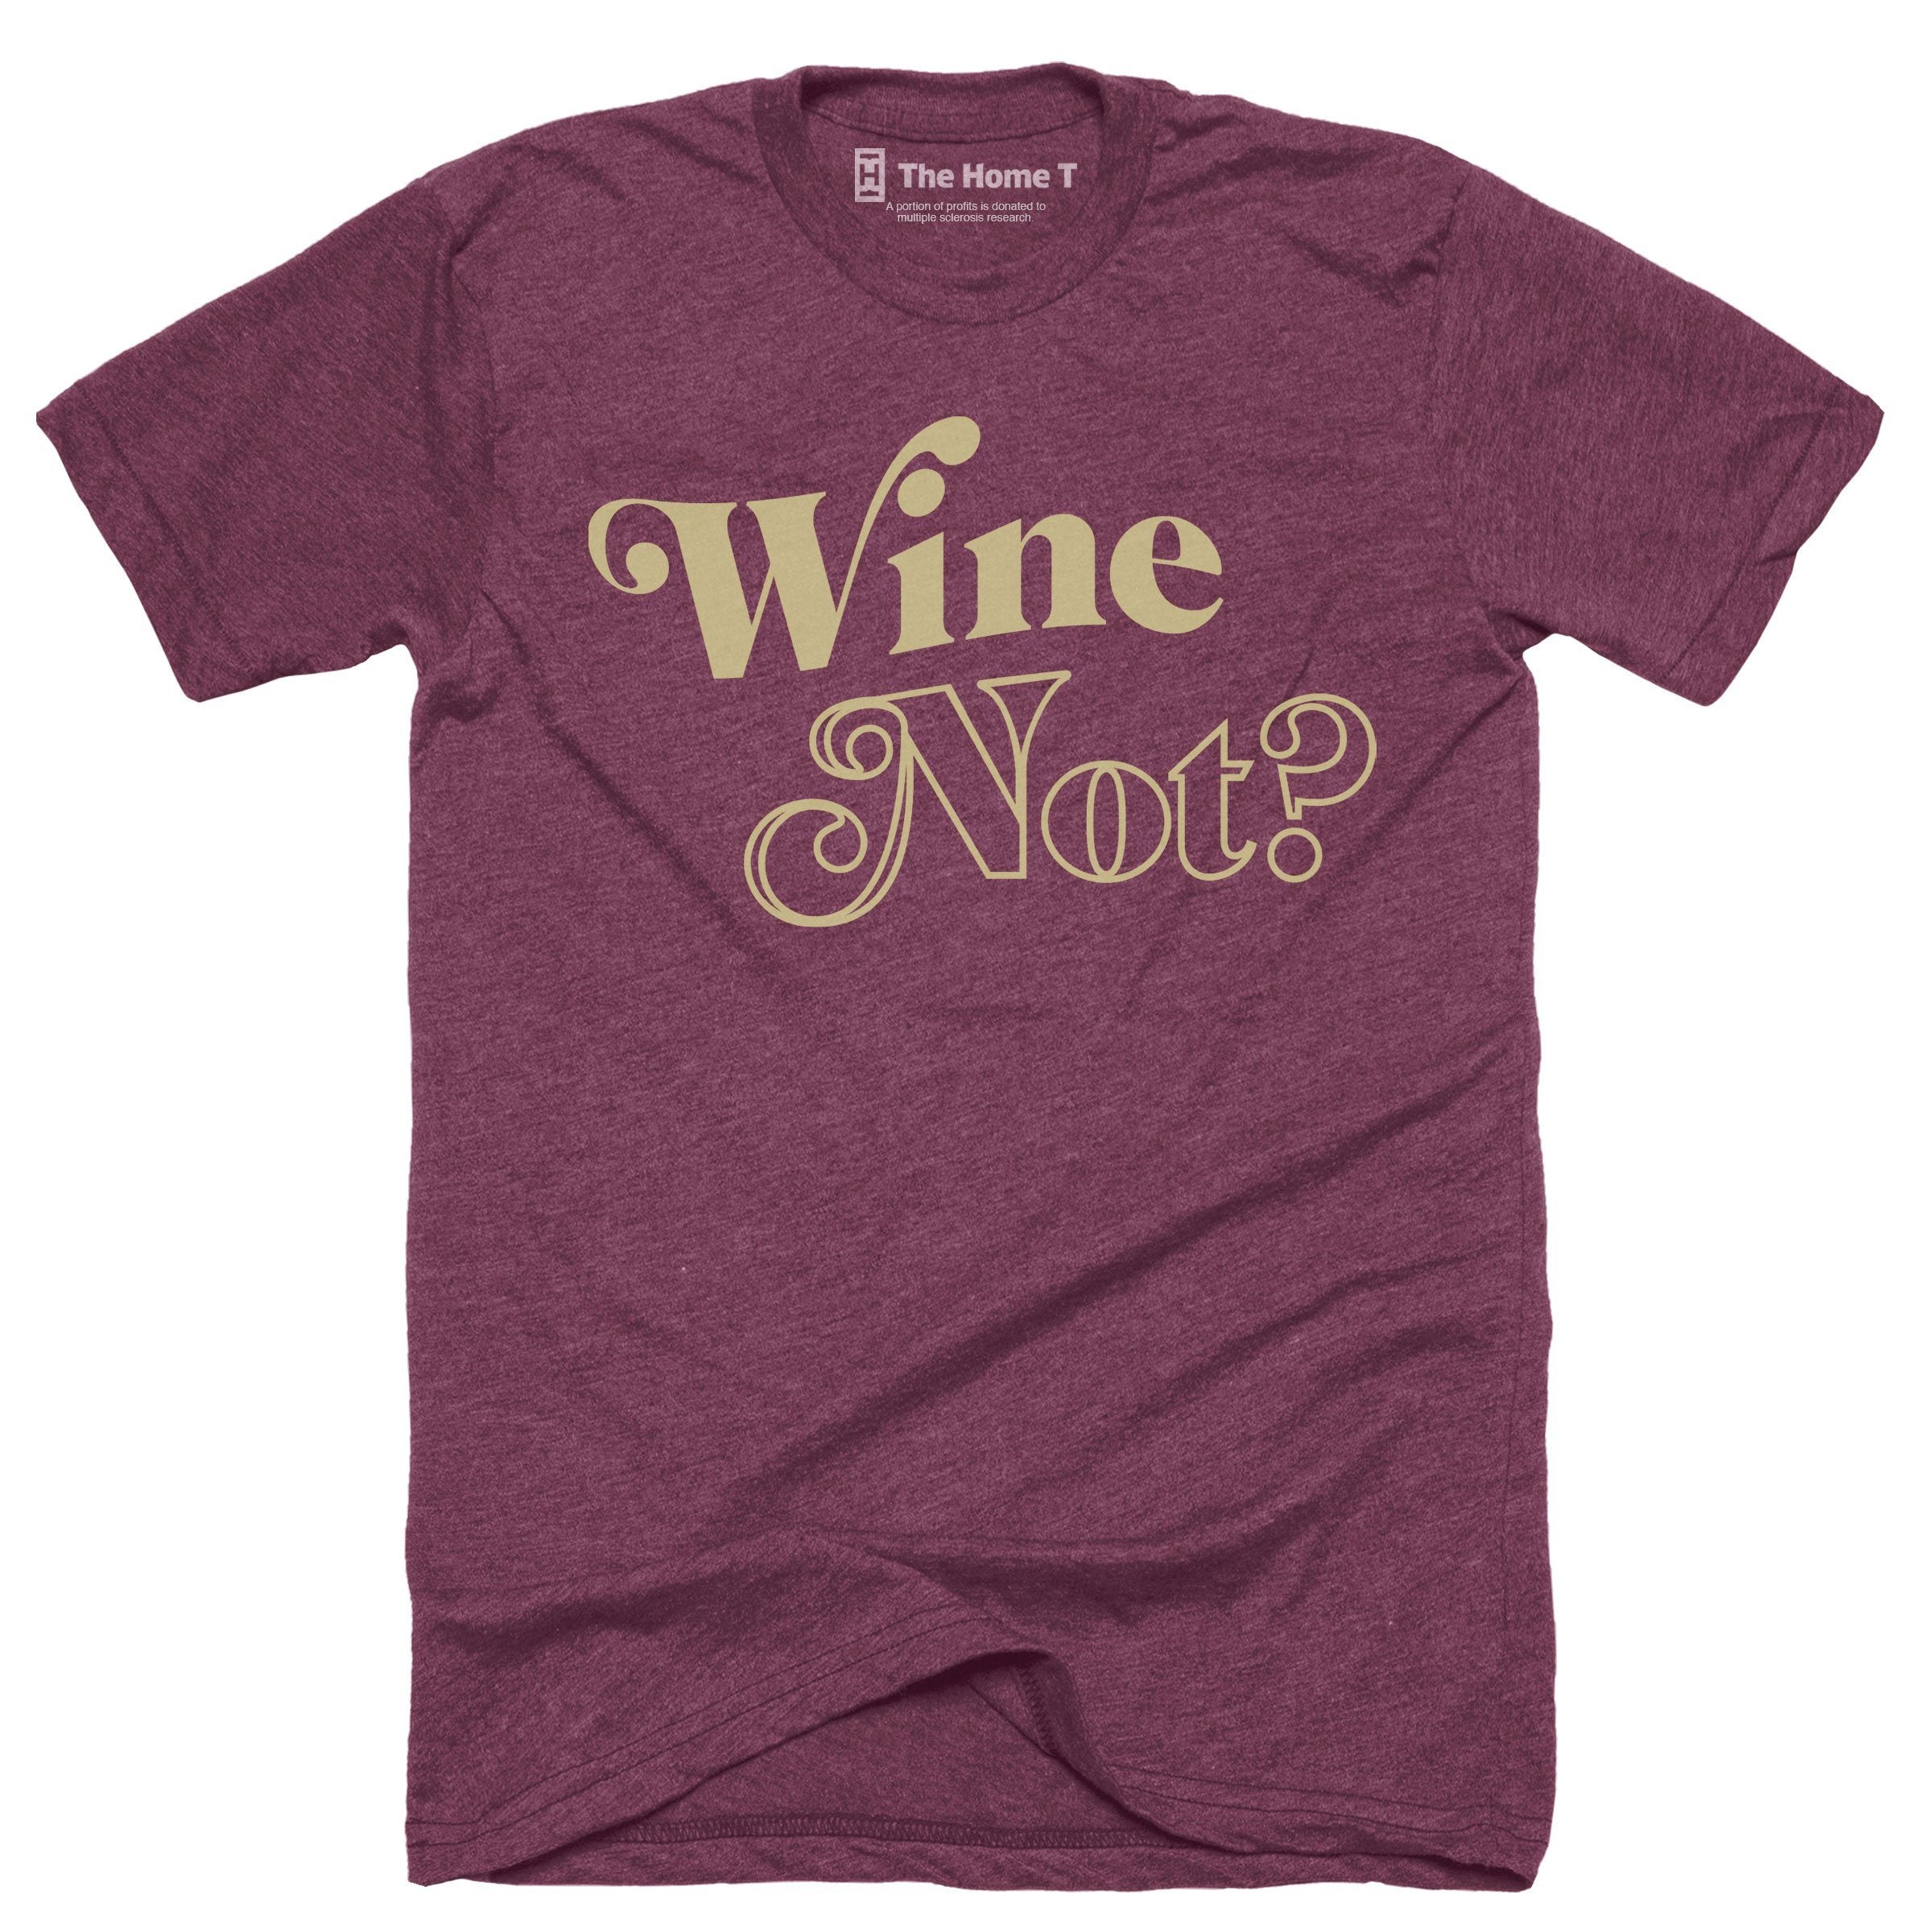 Wine Not The Home T XS Maroon